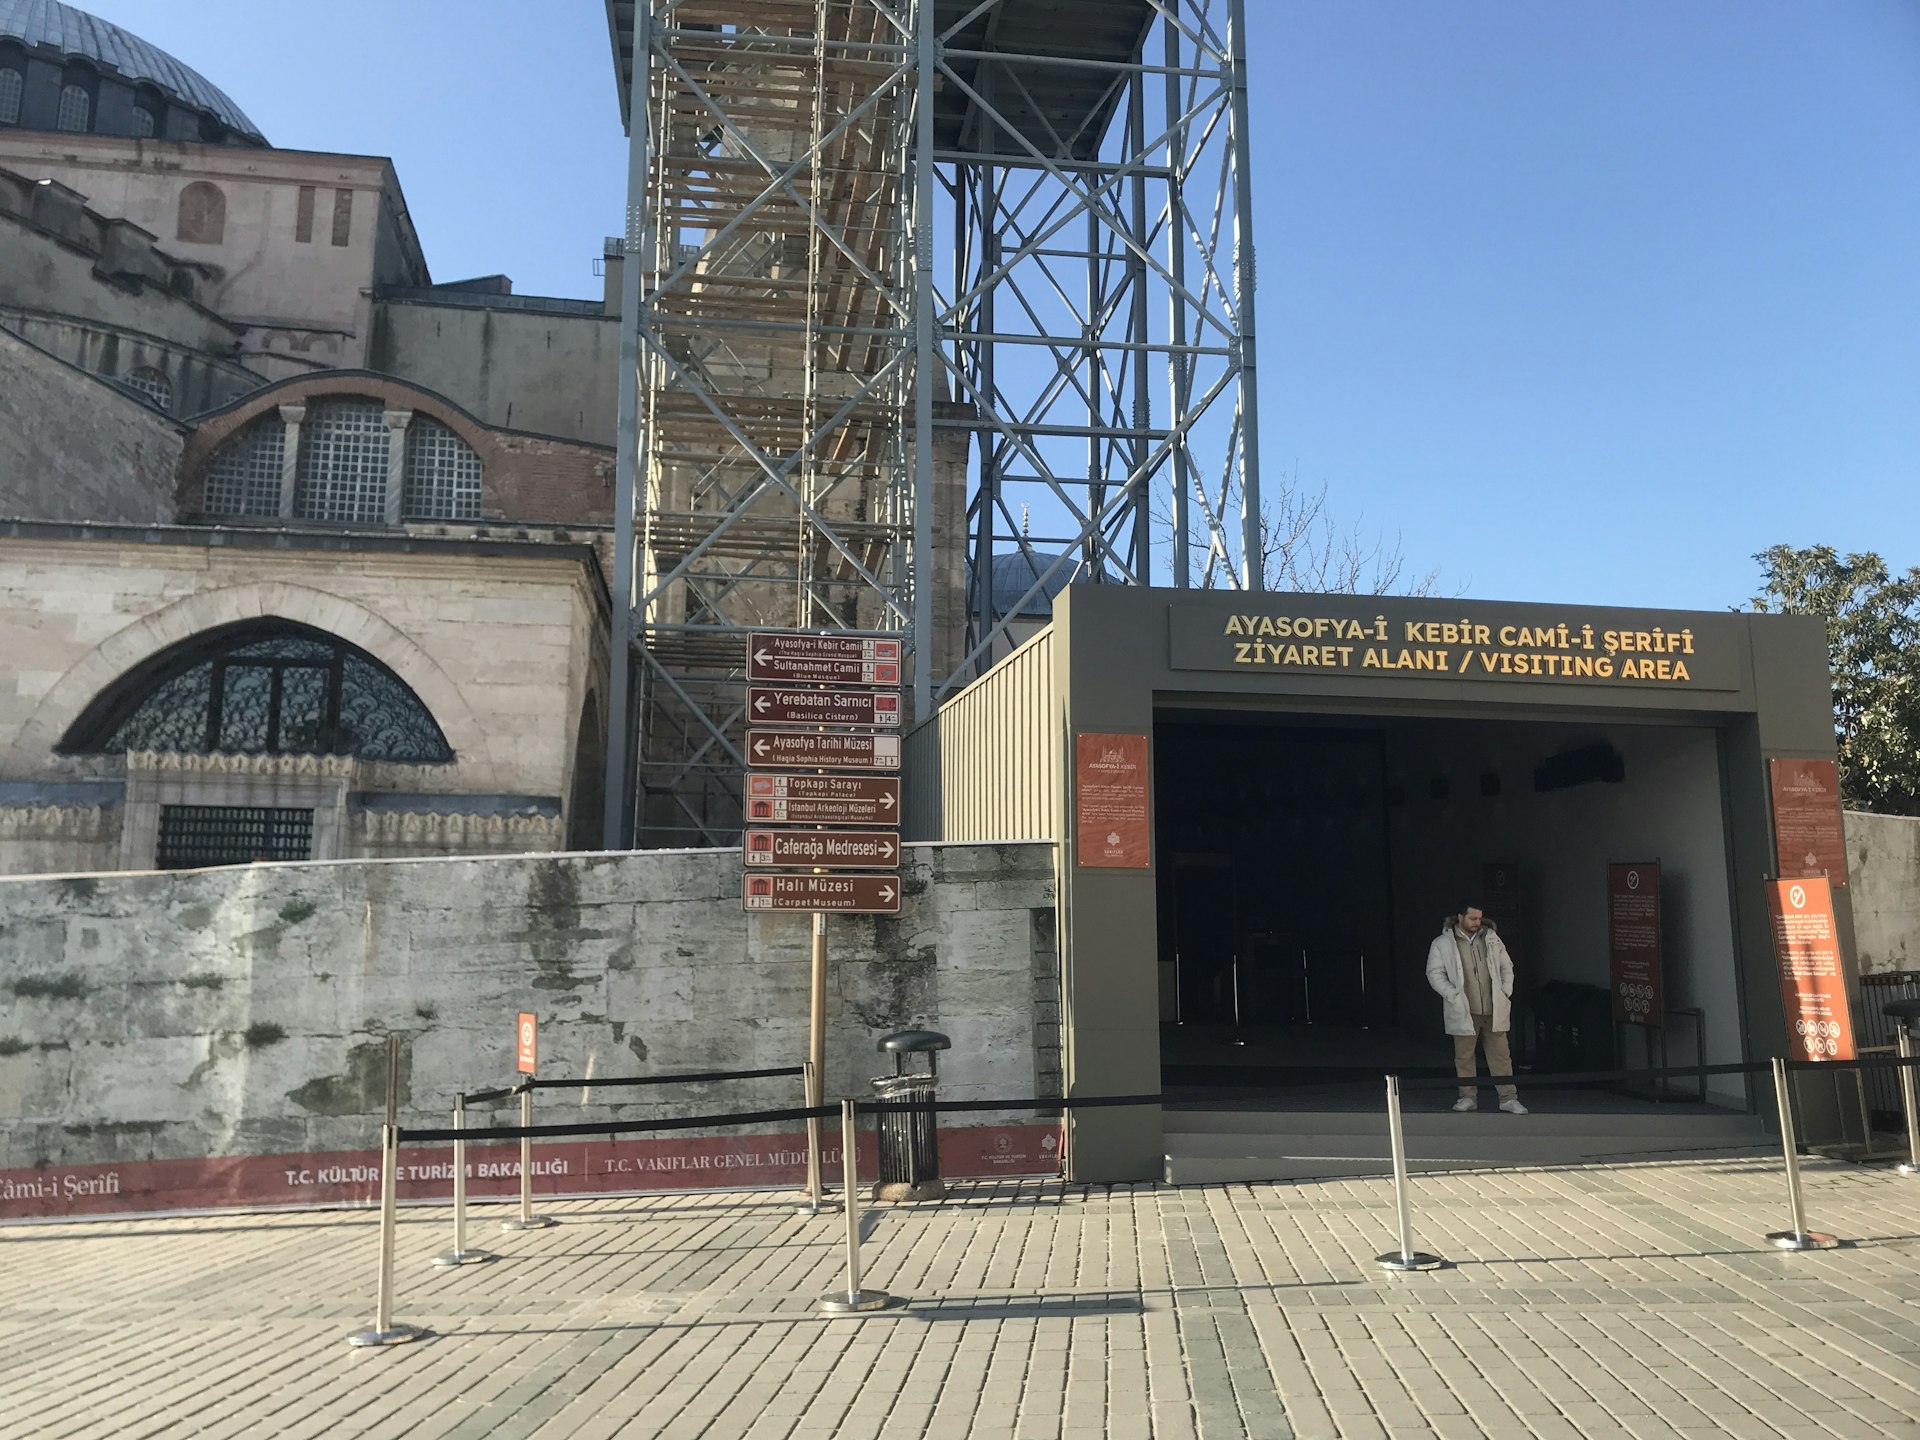 Image of an entrance labeled "AYASOFYA-İ KEBİR CAMİ-İ ŞERİFİ ZİYARET ALANI / VISITING AREA." The entrance is a simple, modern design with a man standing in the doorway and scaffolding visible to the left, indicating possible restoration work. The sign above the entrance is in both Turkish and English..jpg